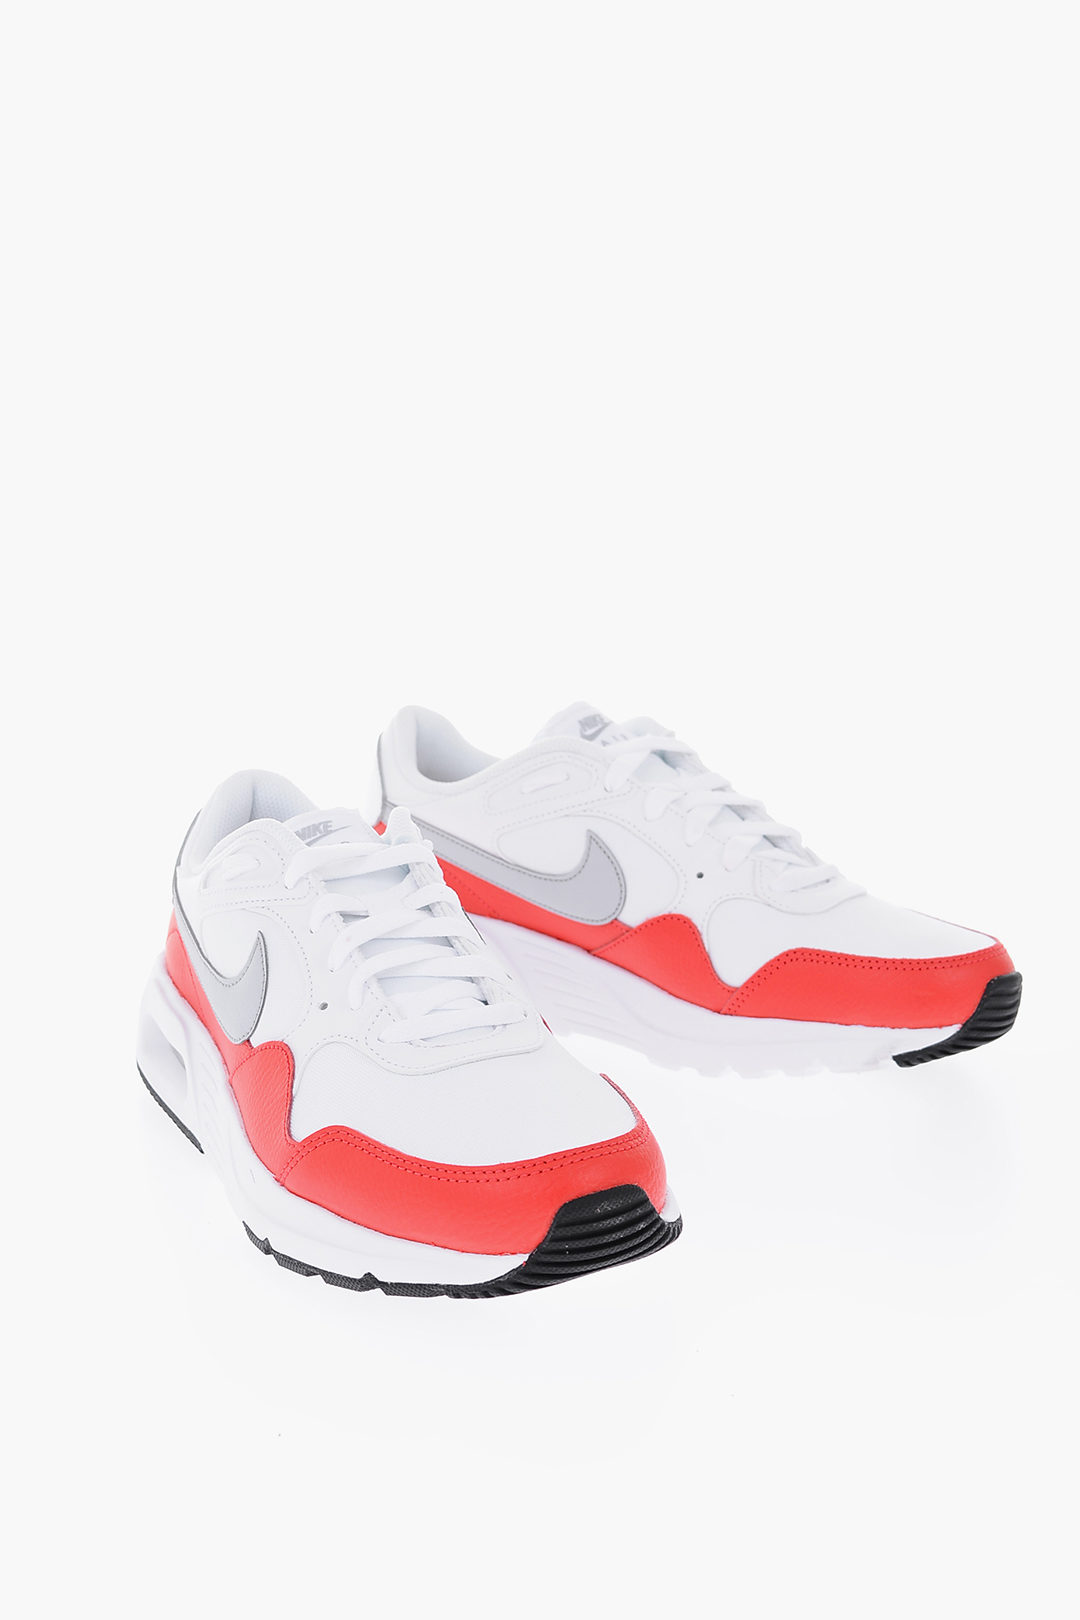 Nike two-tone learher fabric AIR MAX SC sneakers men - Glamood Outlet